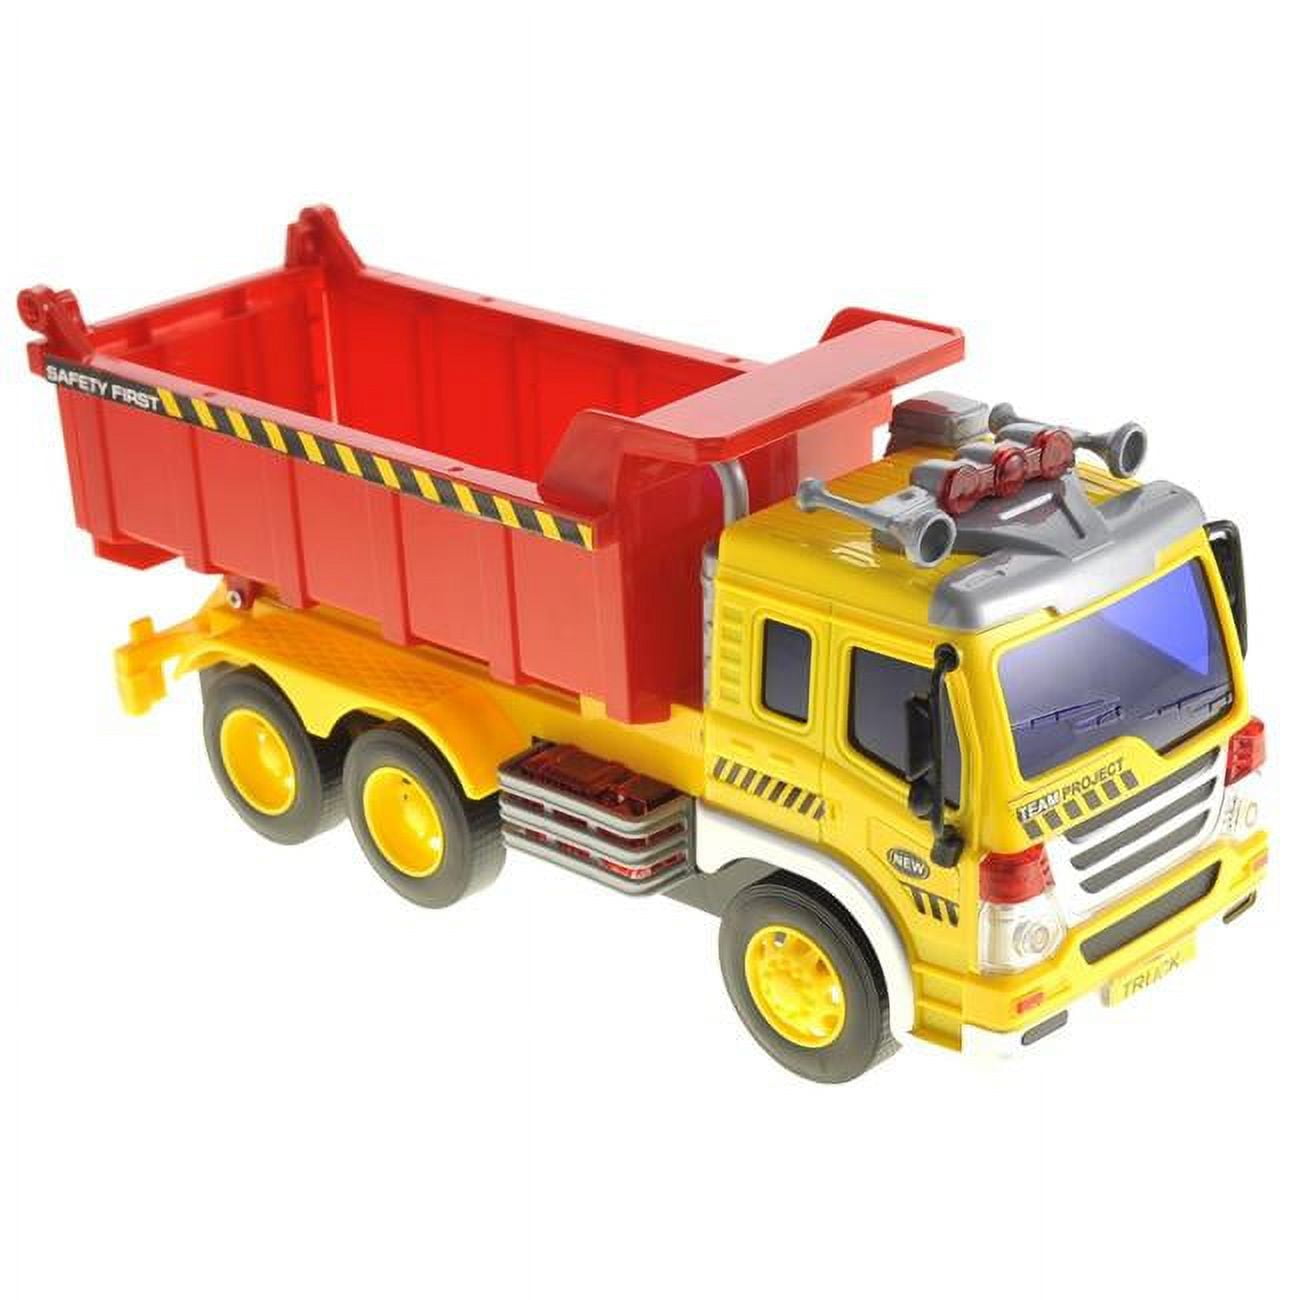 Picture of Azimport PS301S Friction Powered Dump Truck Toy